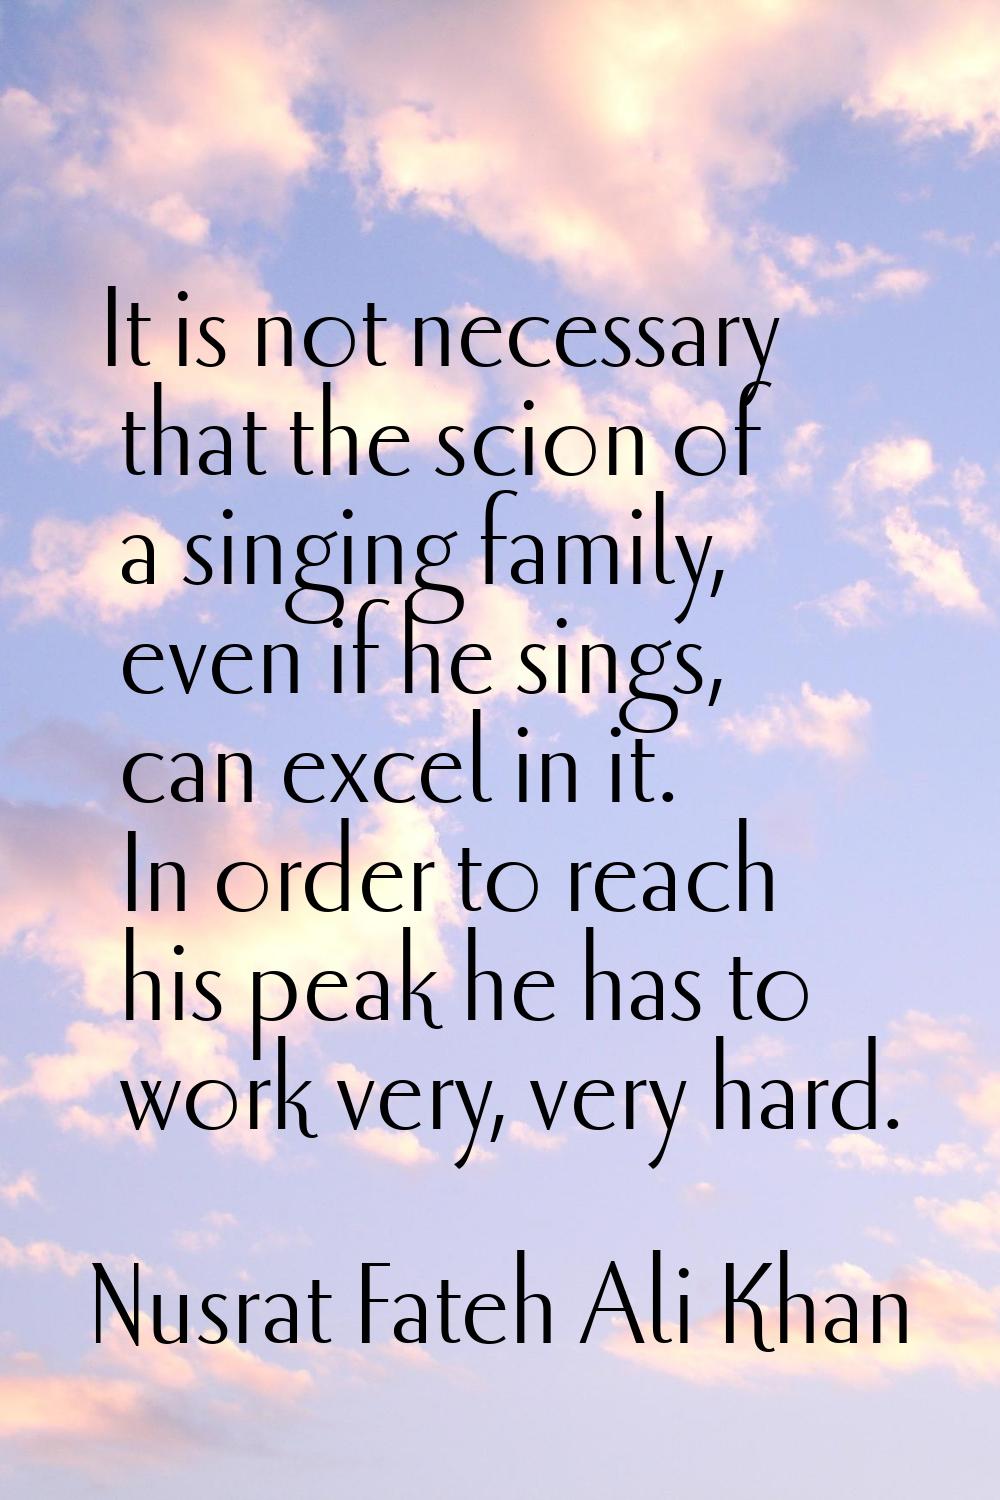 It is not necessary that the scion of a singing family, even if he sings, can excel in it. In order